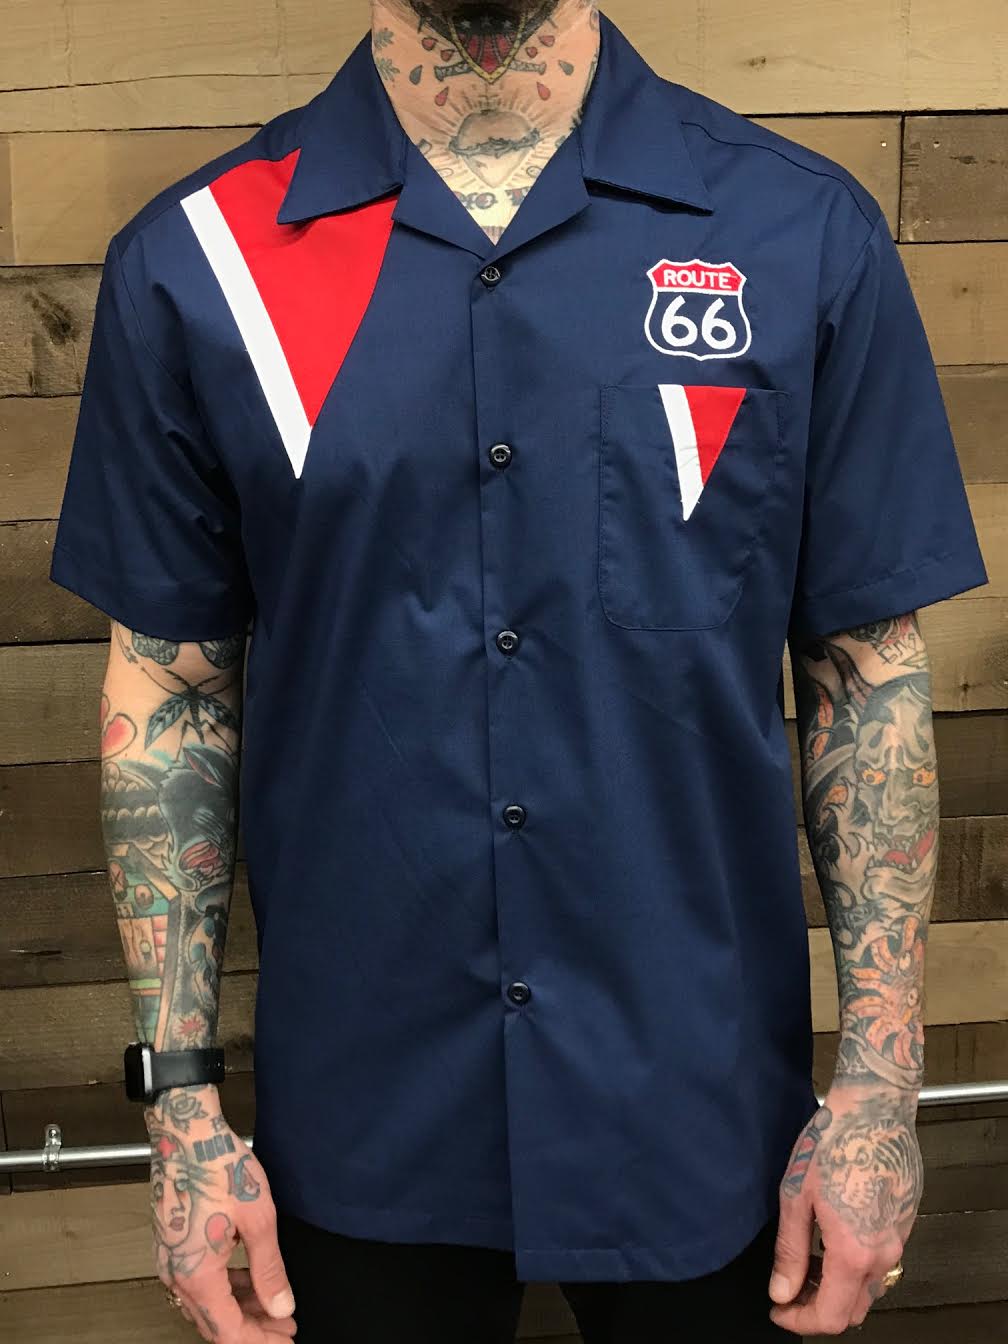 STEADY- ROUTE 66 SERVICE STATION BUTTON UP